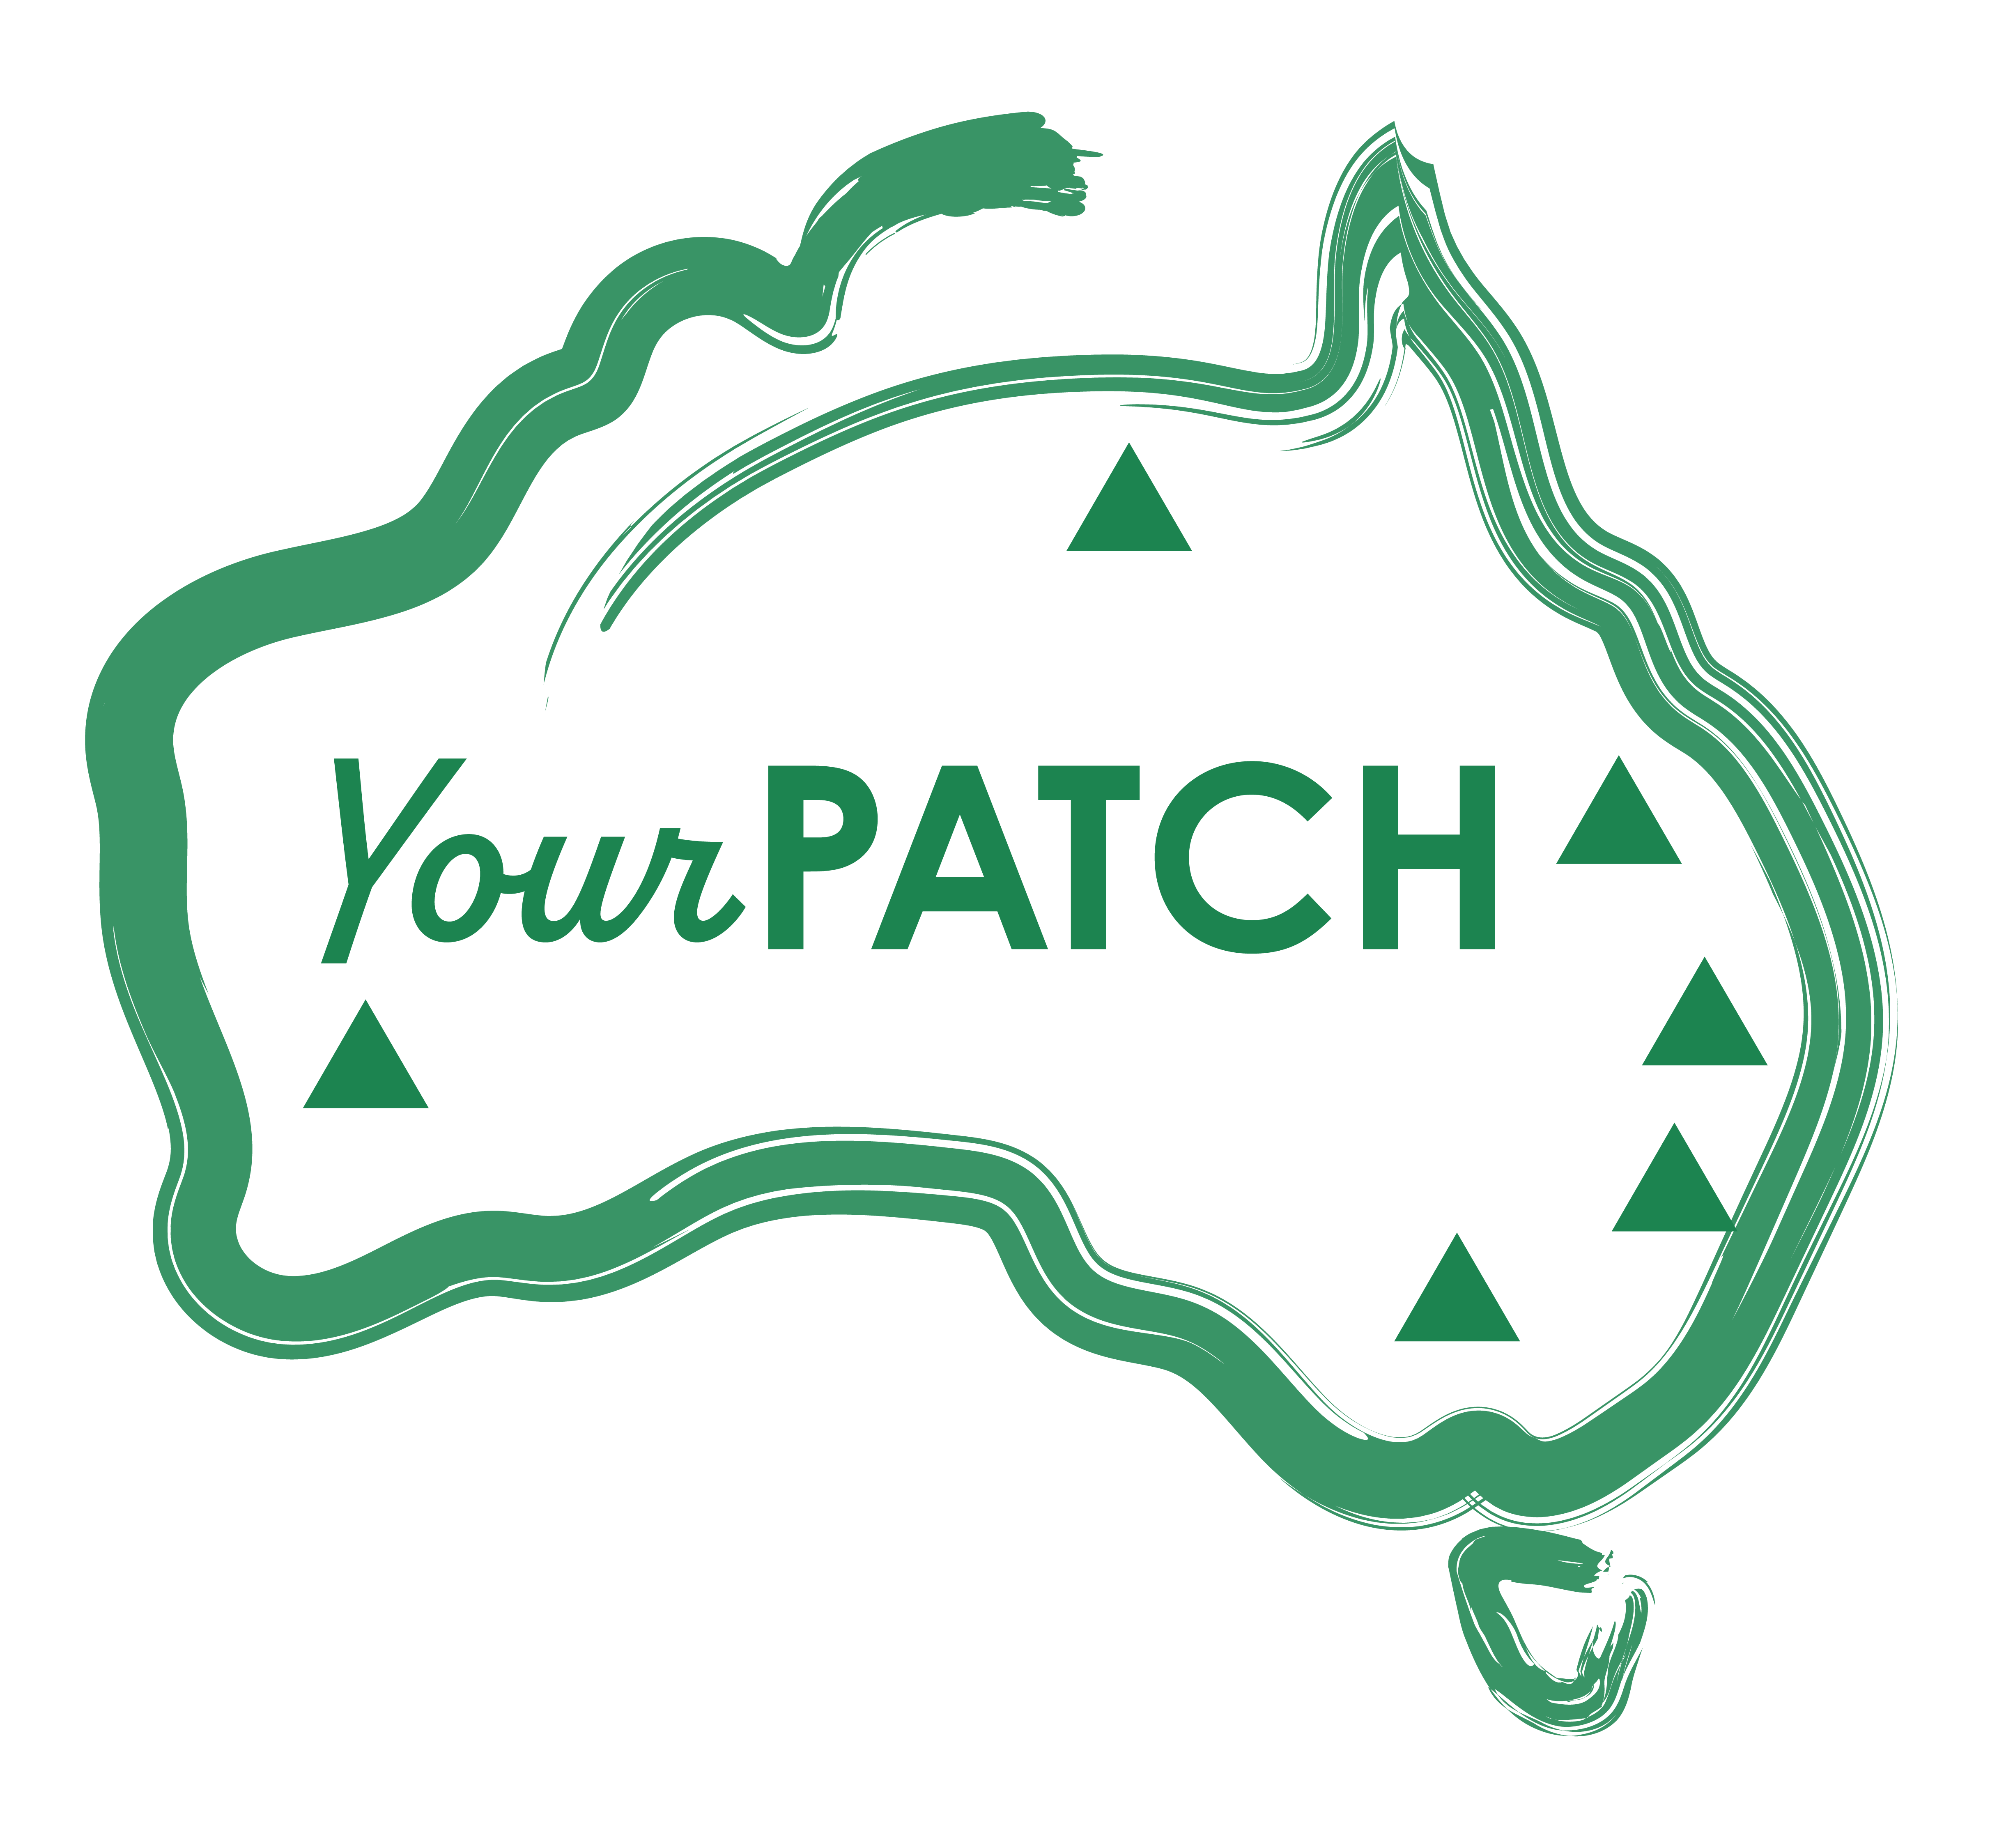 ‘Your Patch’ – Find the perfect rental, investment property, or home of your dreams